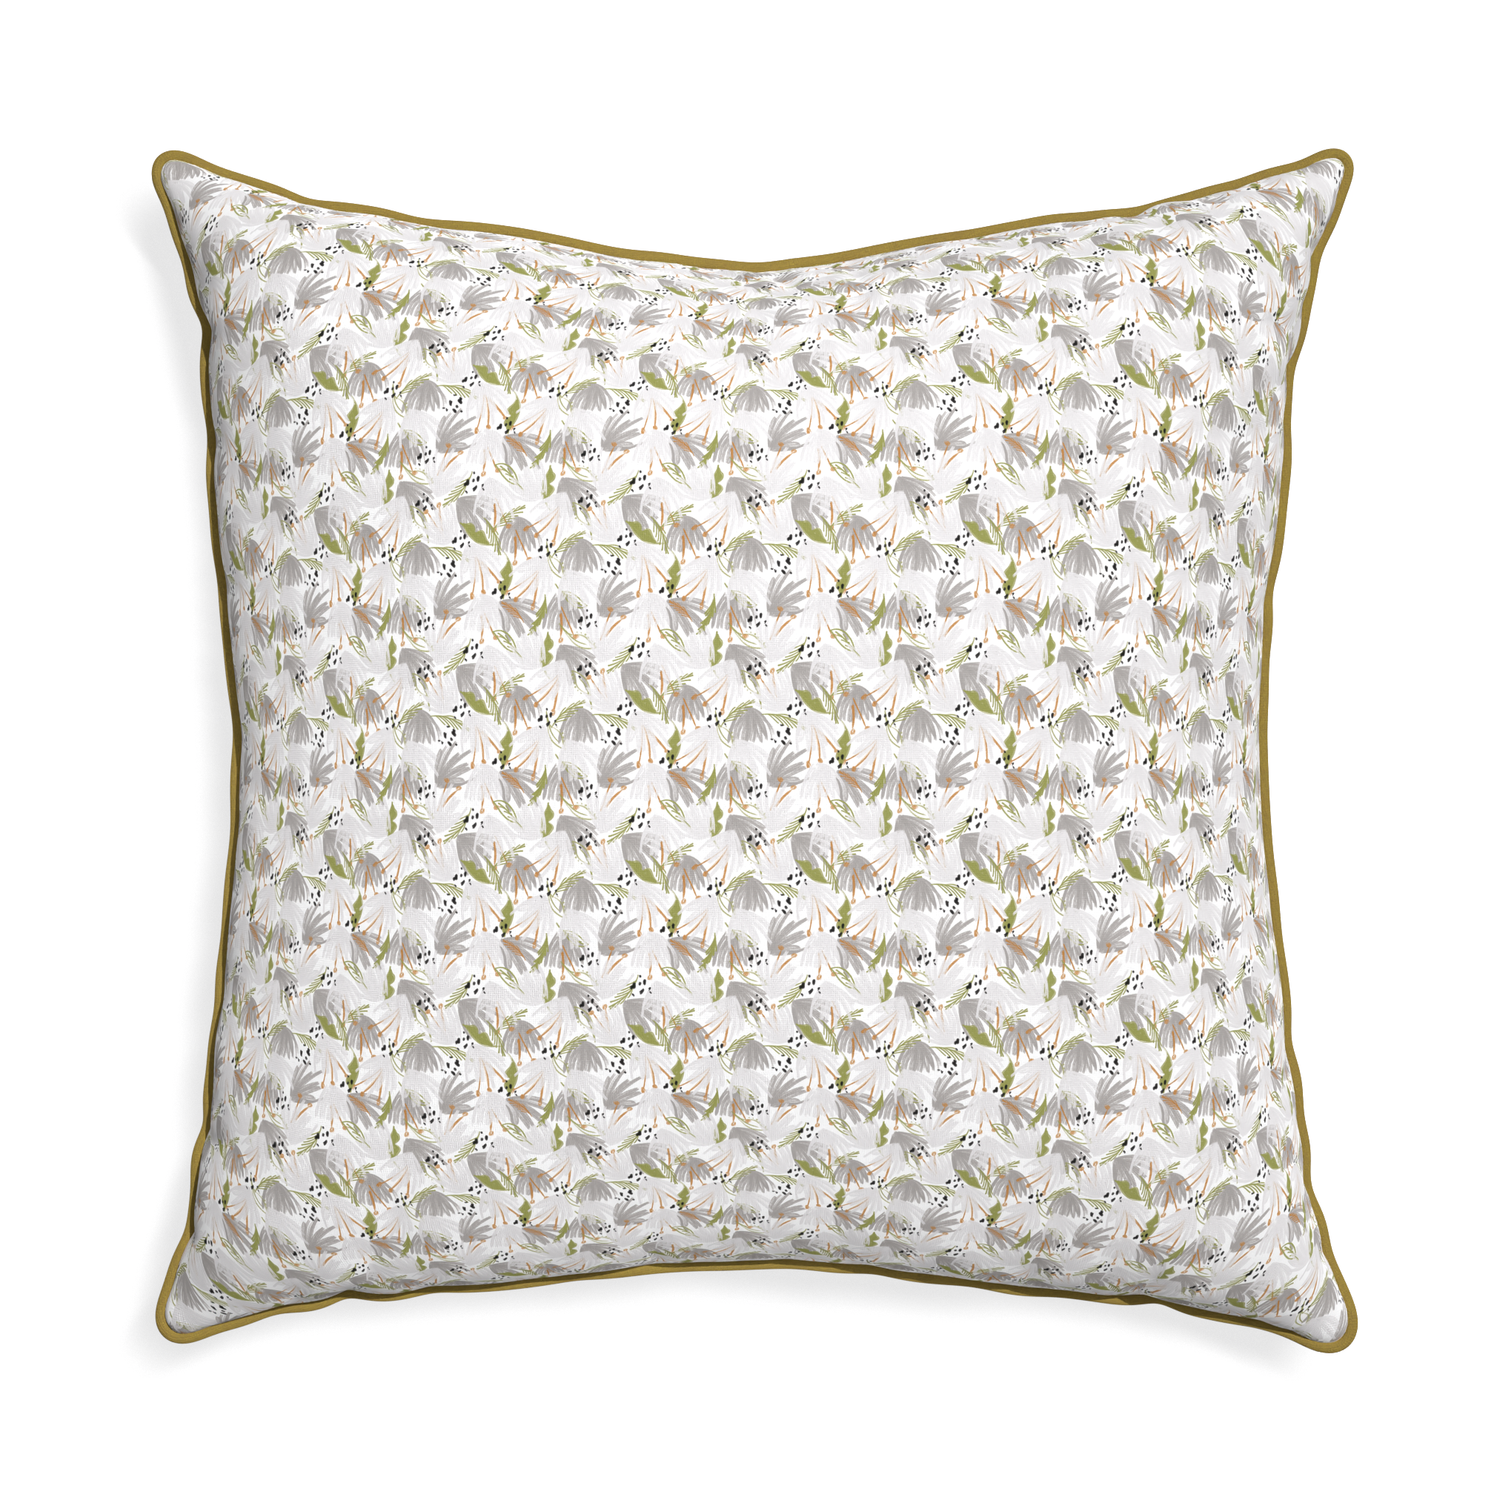 Euro-sham eden grey custom grey floralpillow with c piping on white background